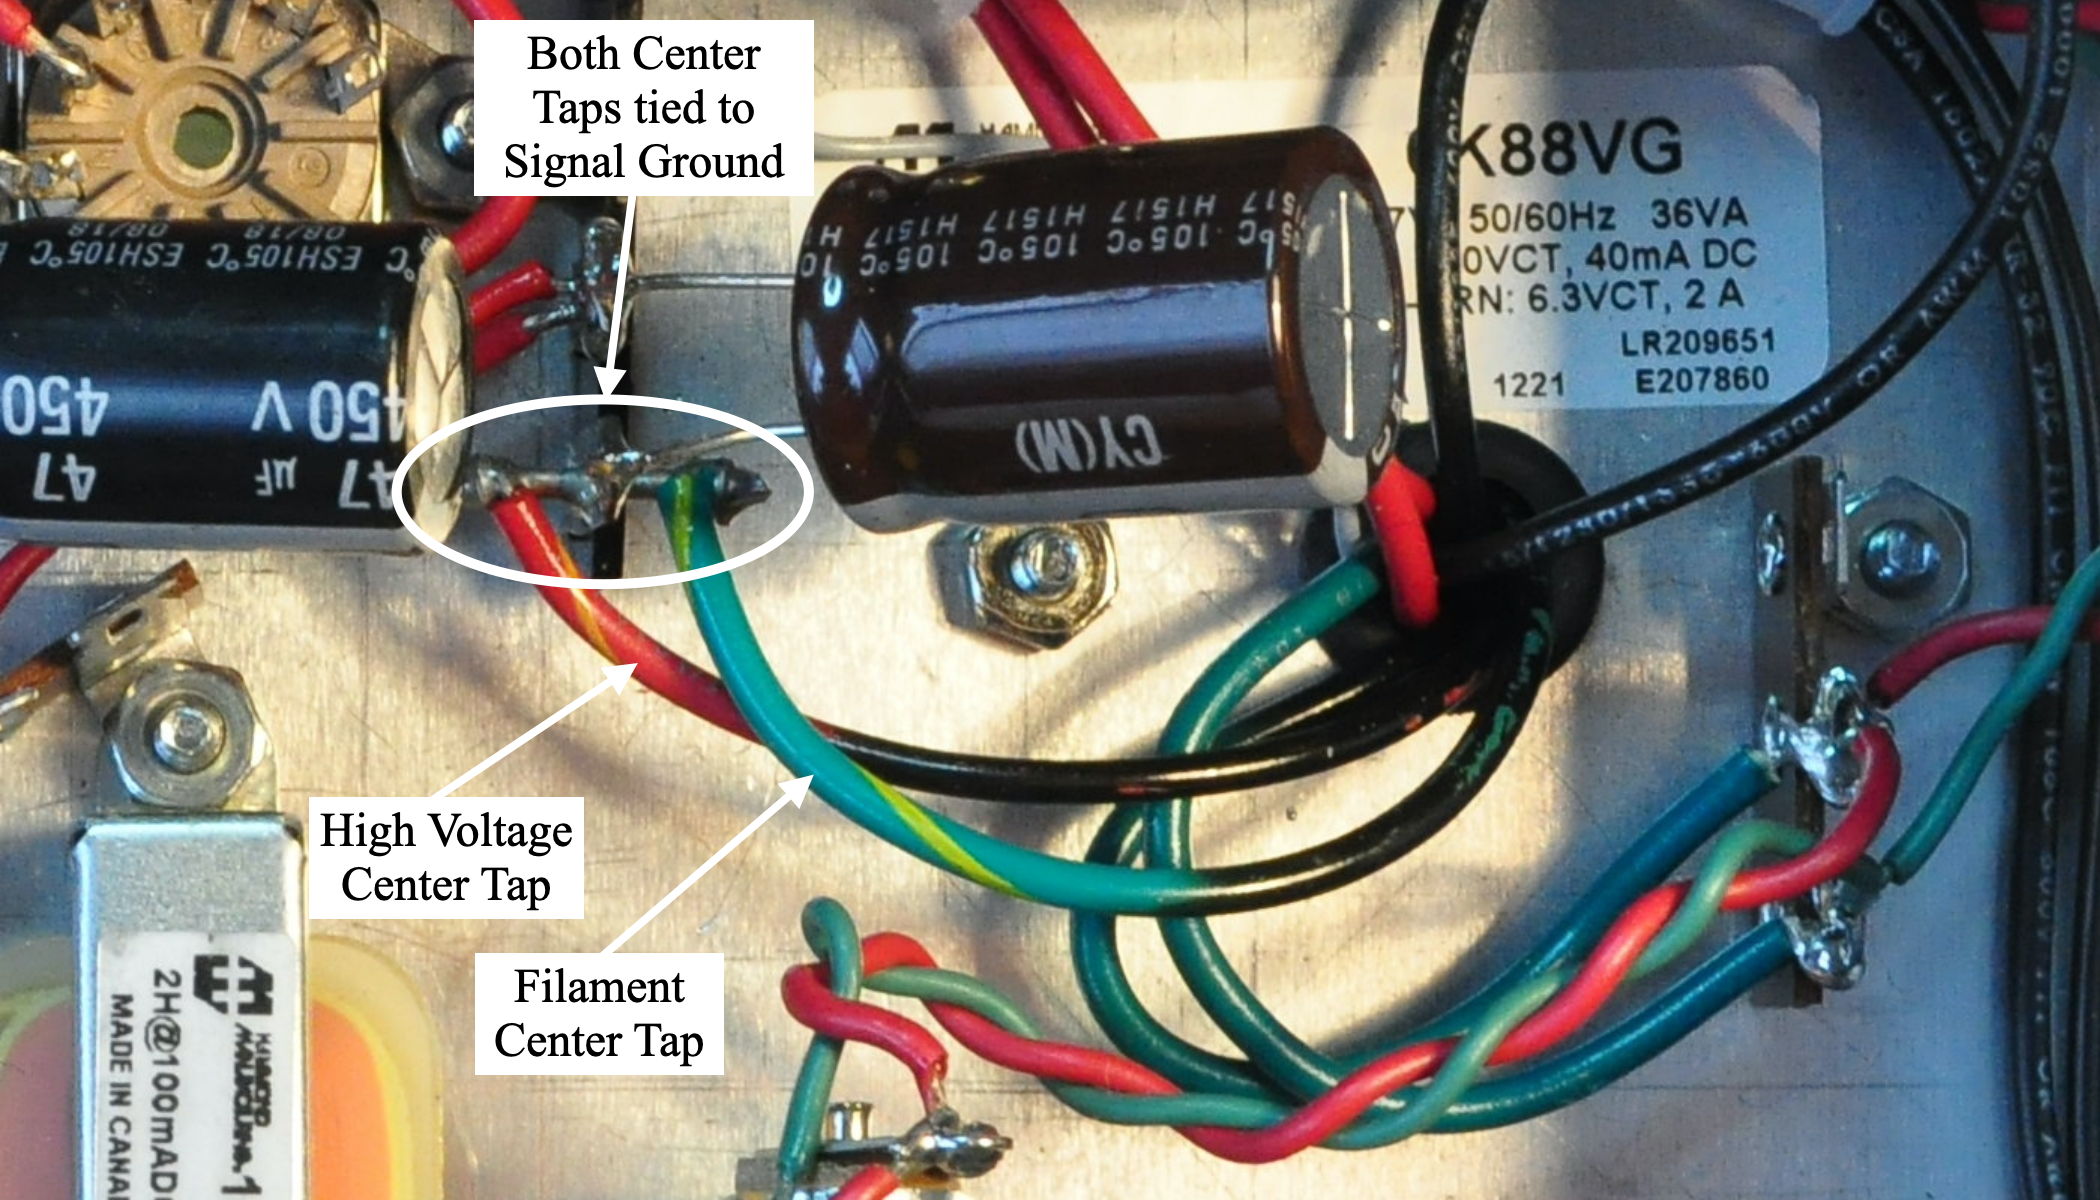 Center Tap Connections